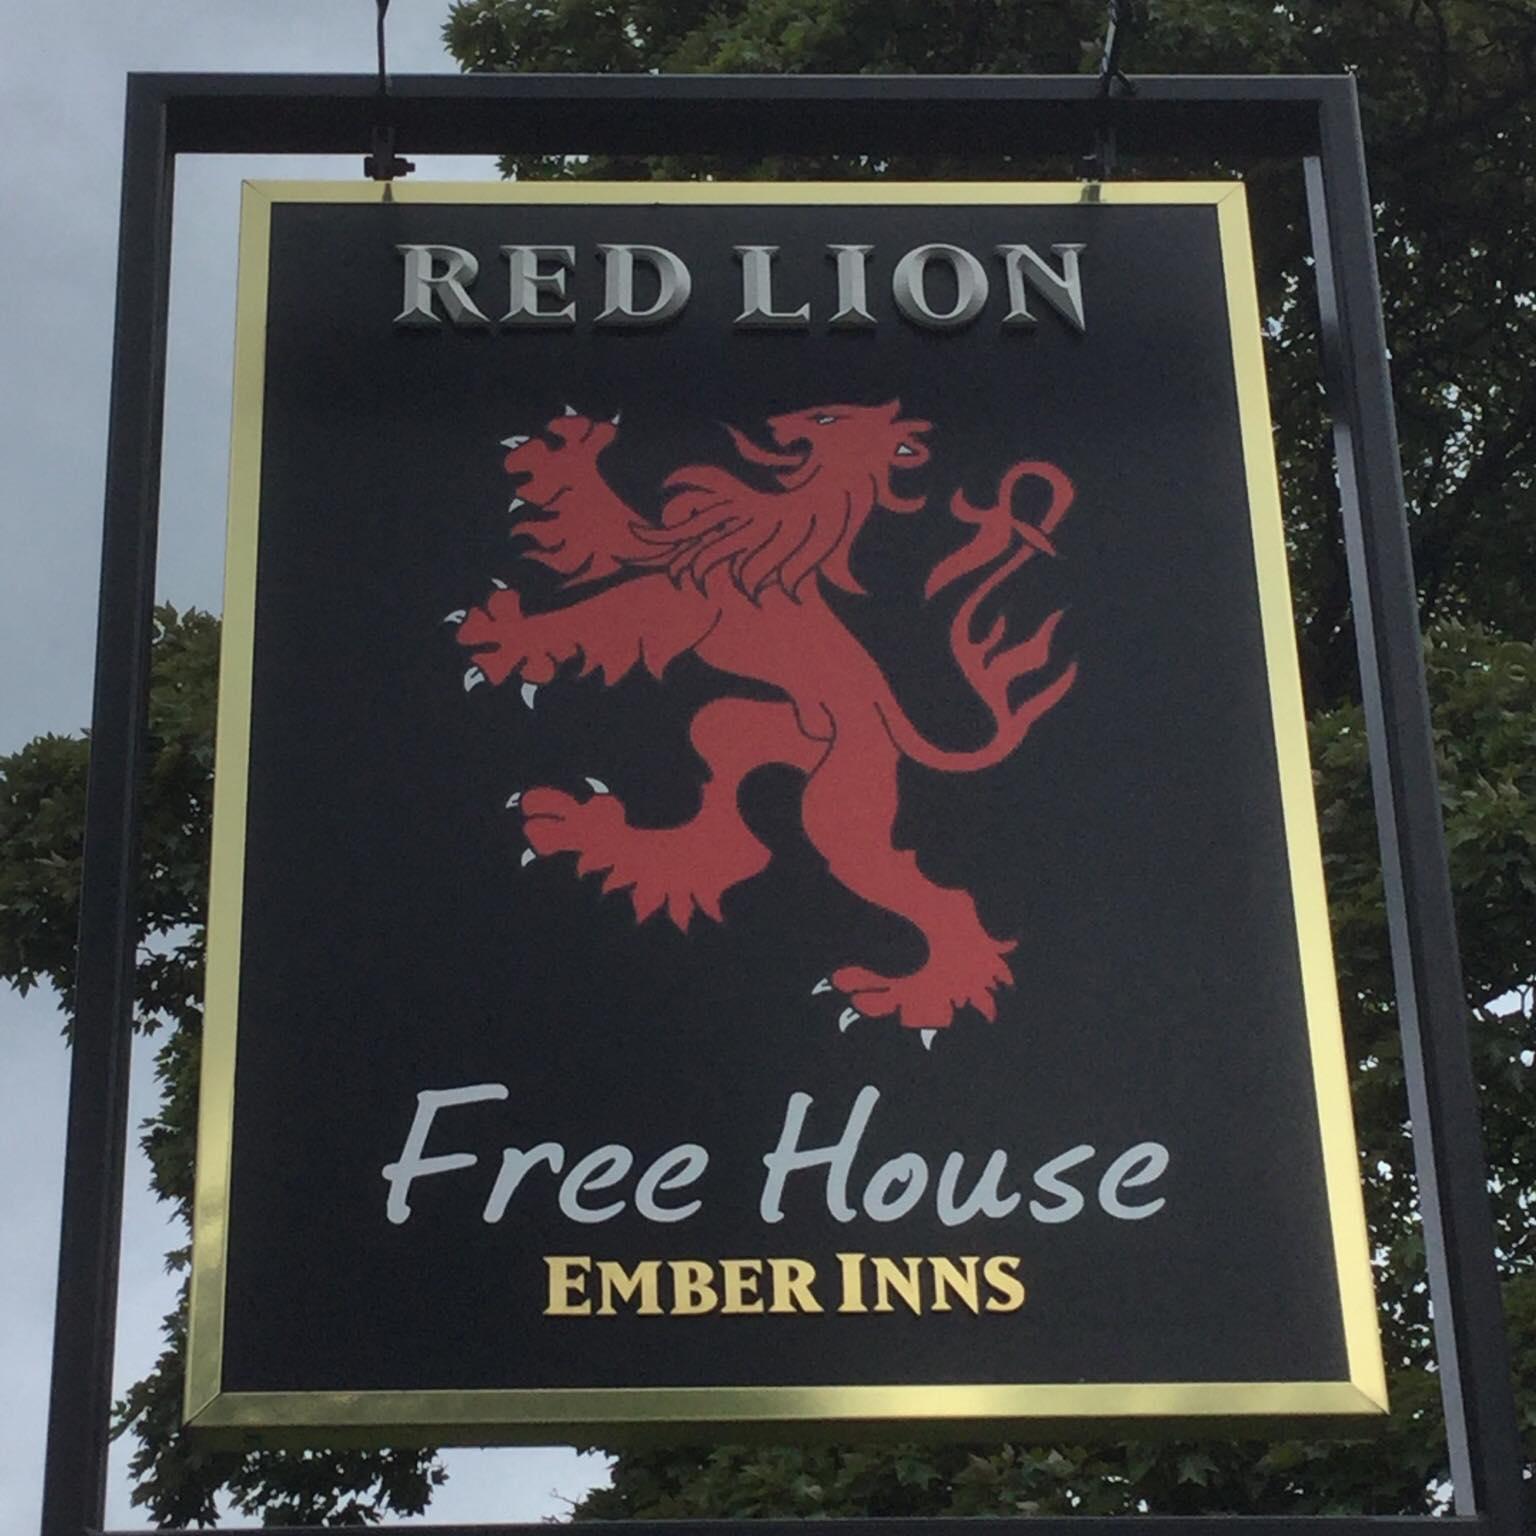 The Red Lion Kings Heath